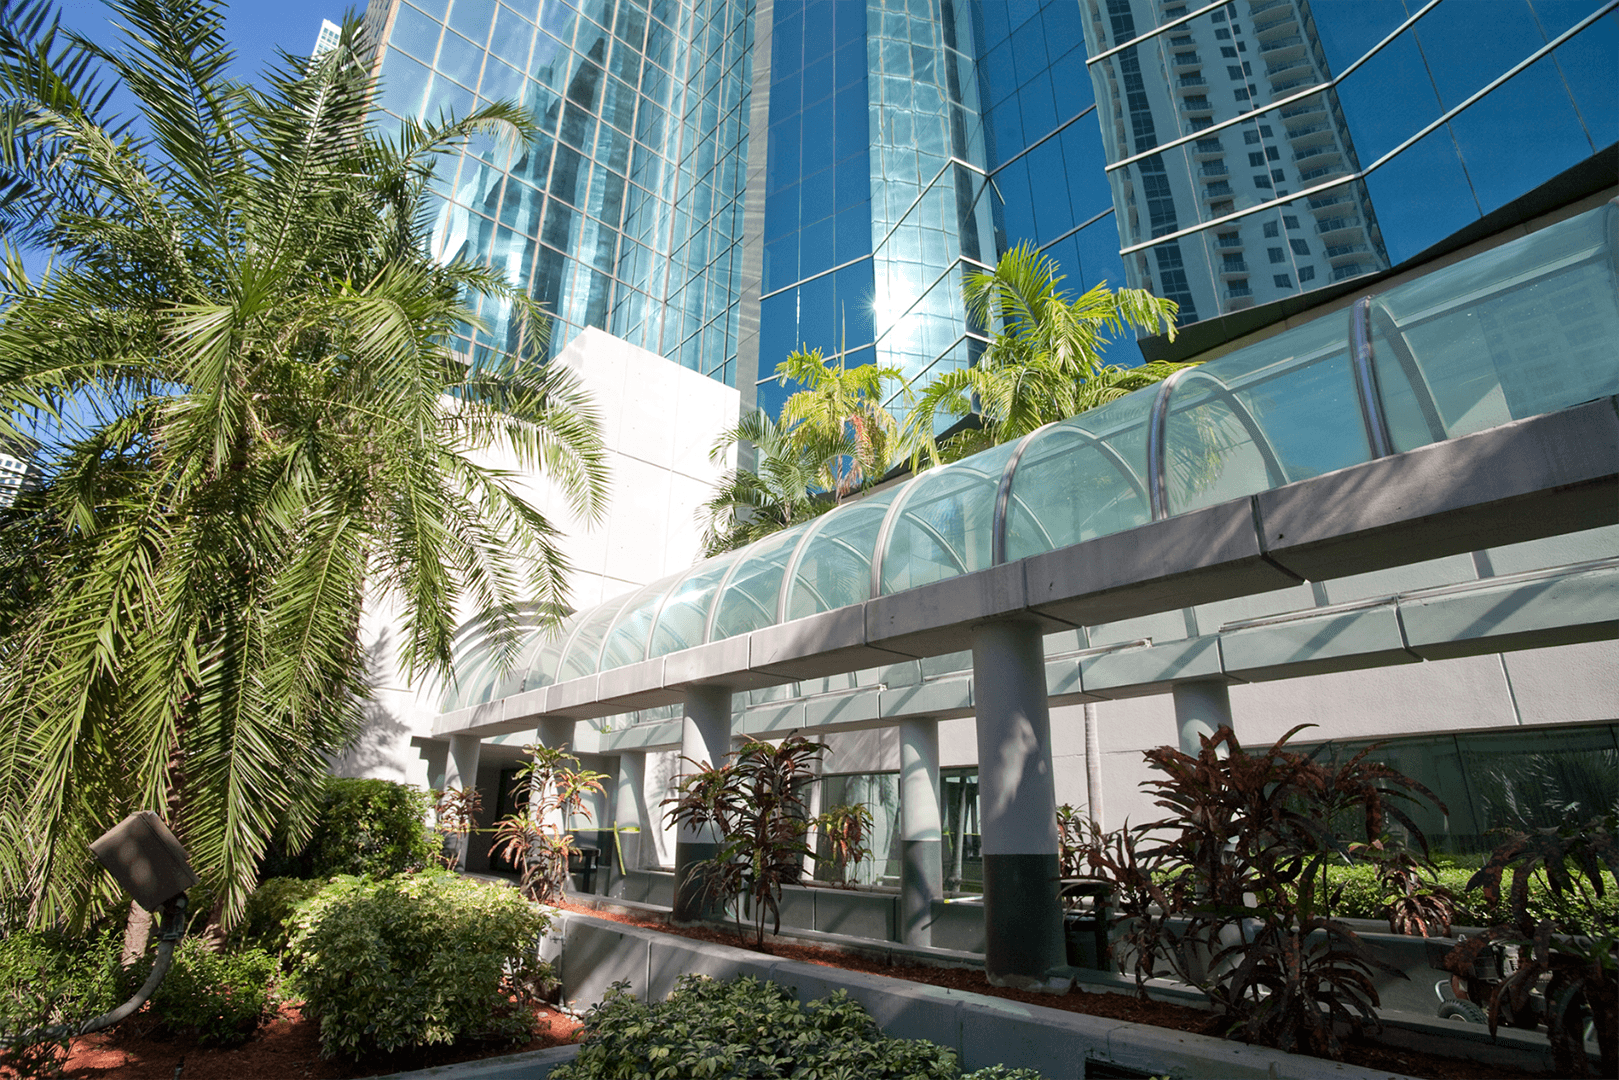 View of the North South Walkway surrounded by an arched glass rooftop